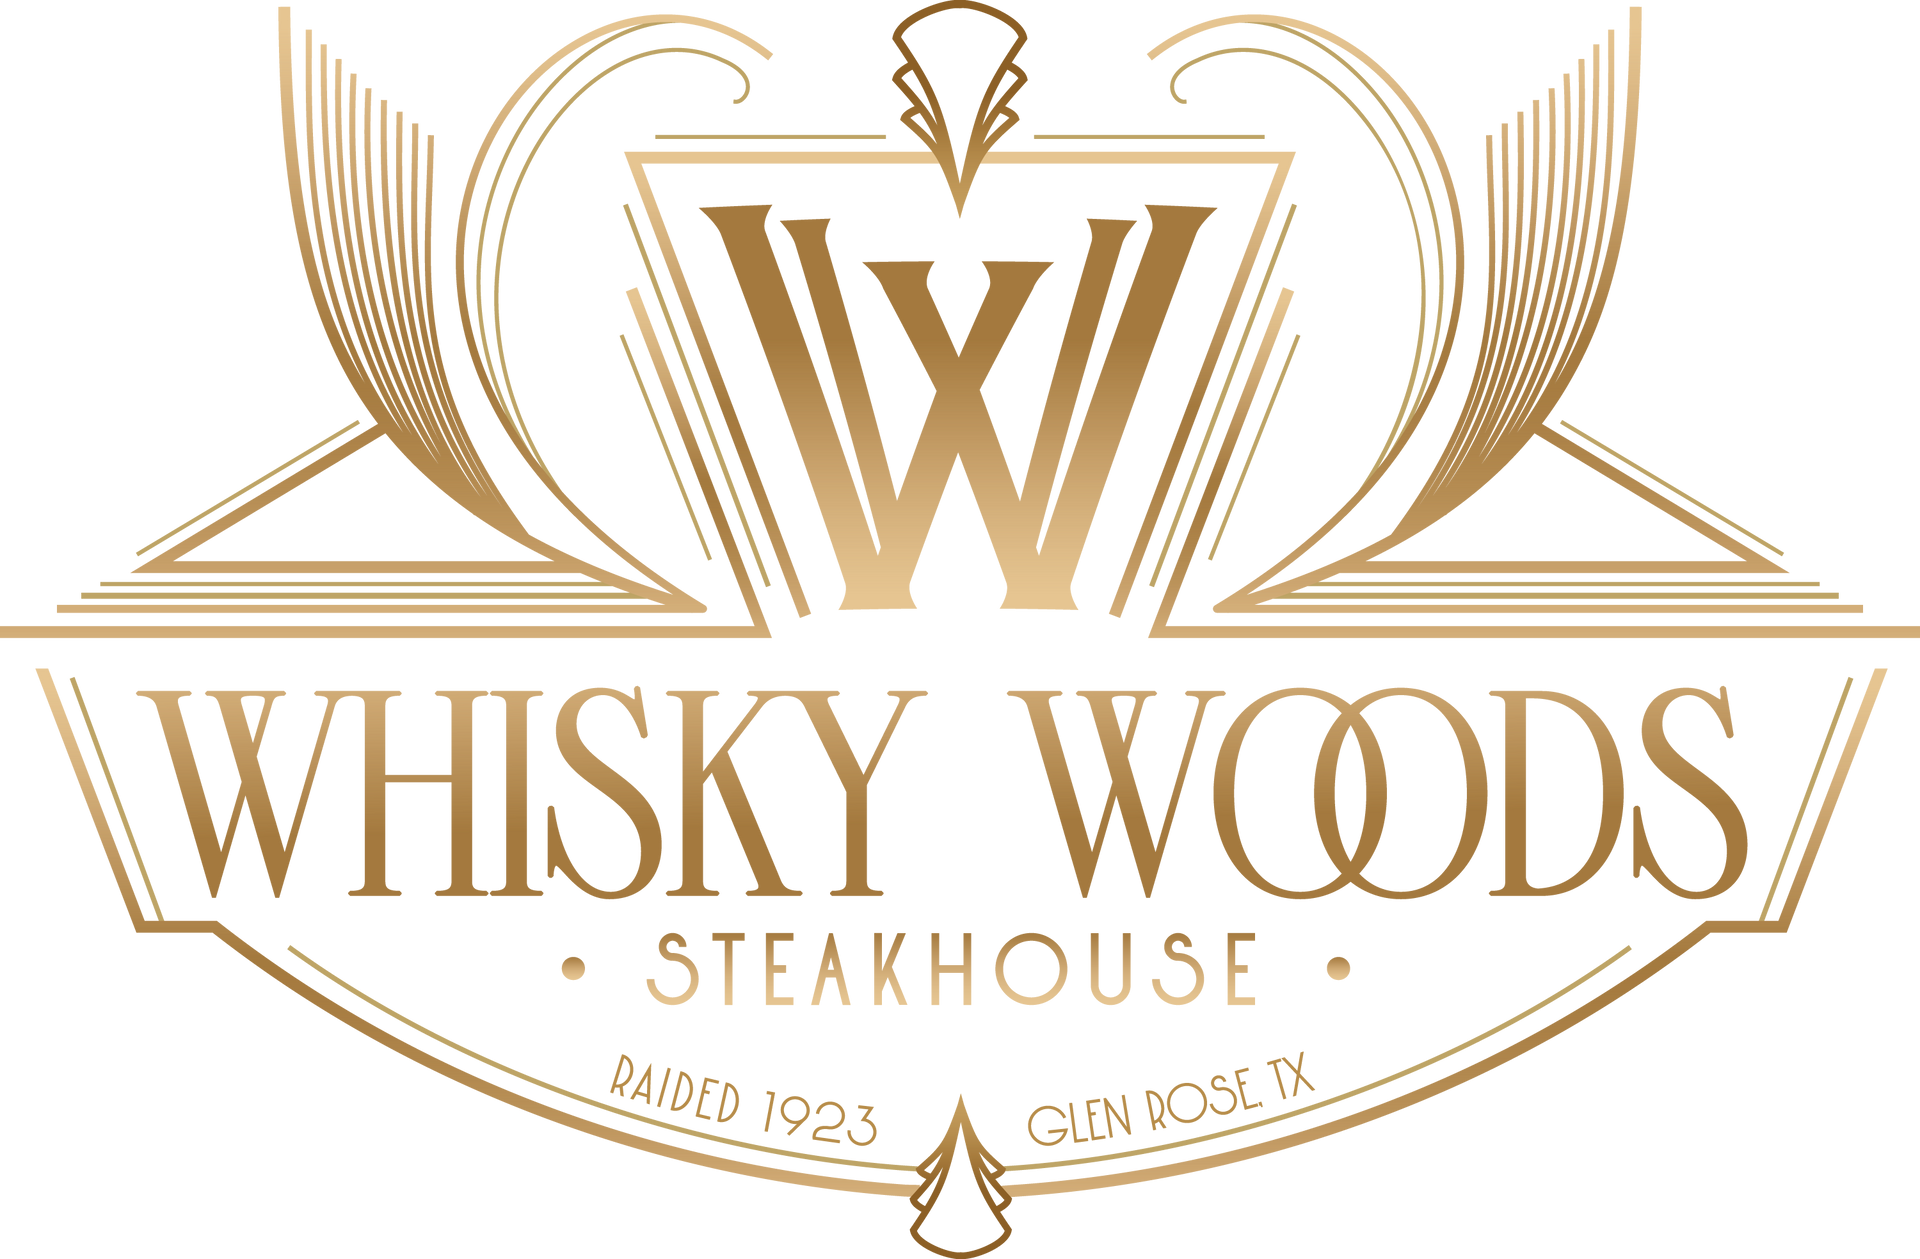 The logo for whisky woods steakhouse is a gold logo with a w on it.